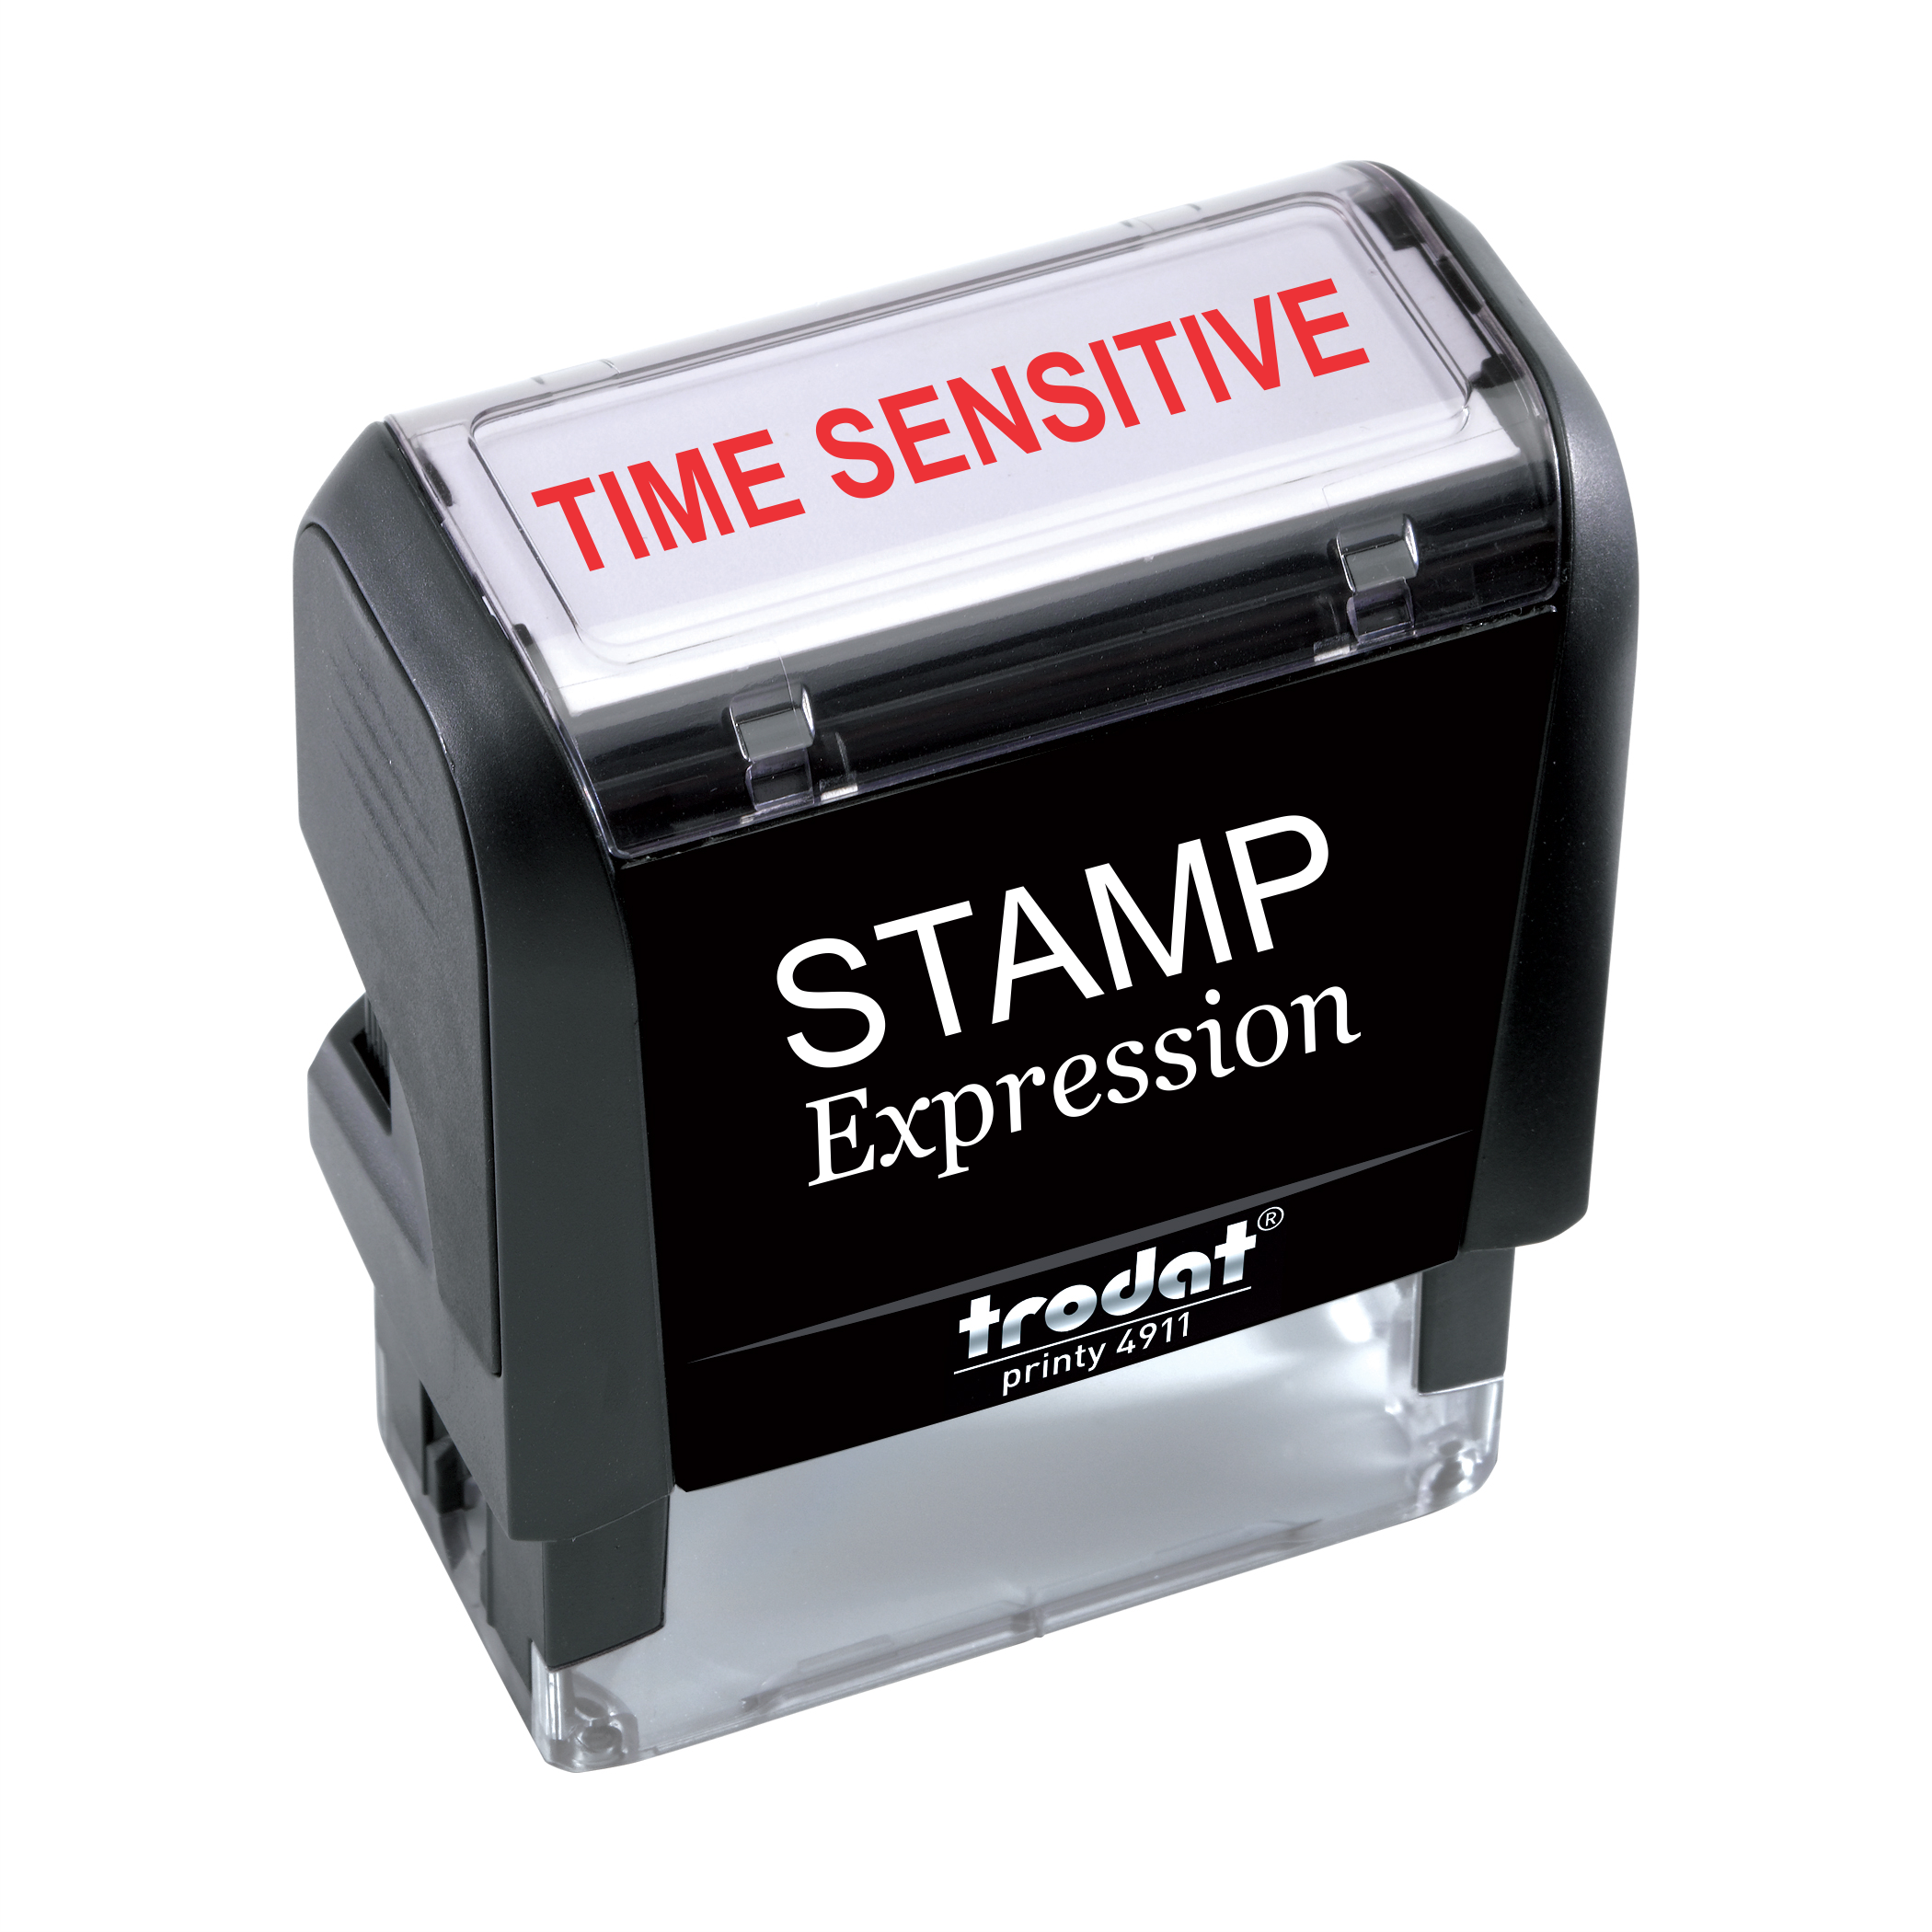 TIME Sensitive Office Self Inking Rubber Stamp